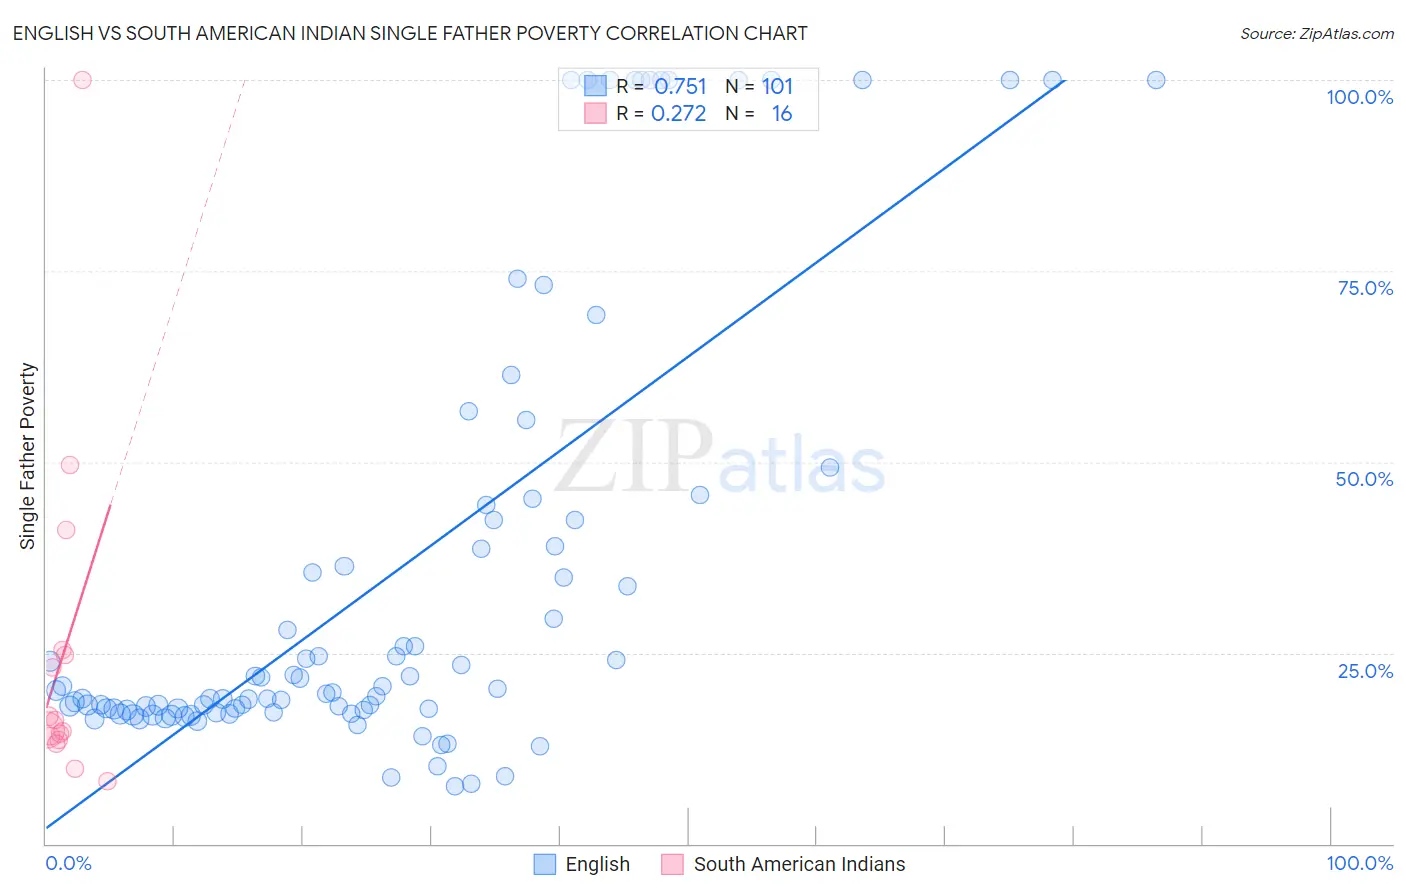 English vs South American Indian Single Father Poverty